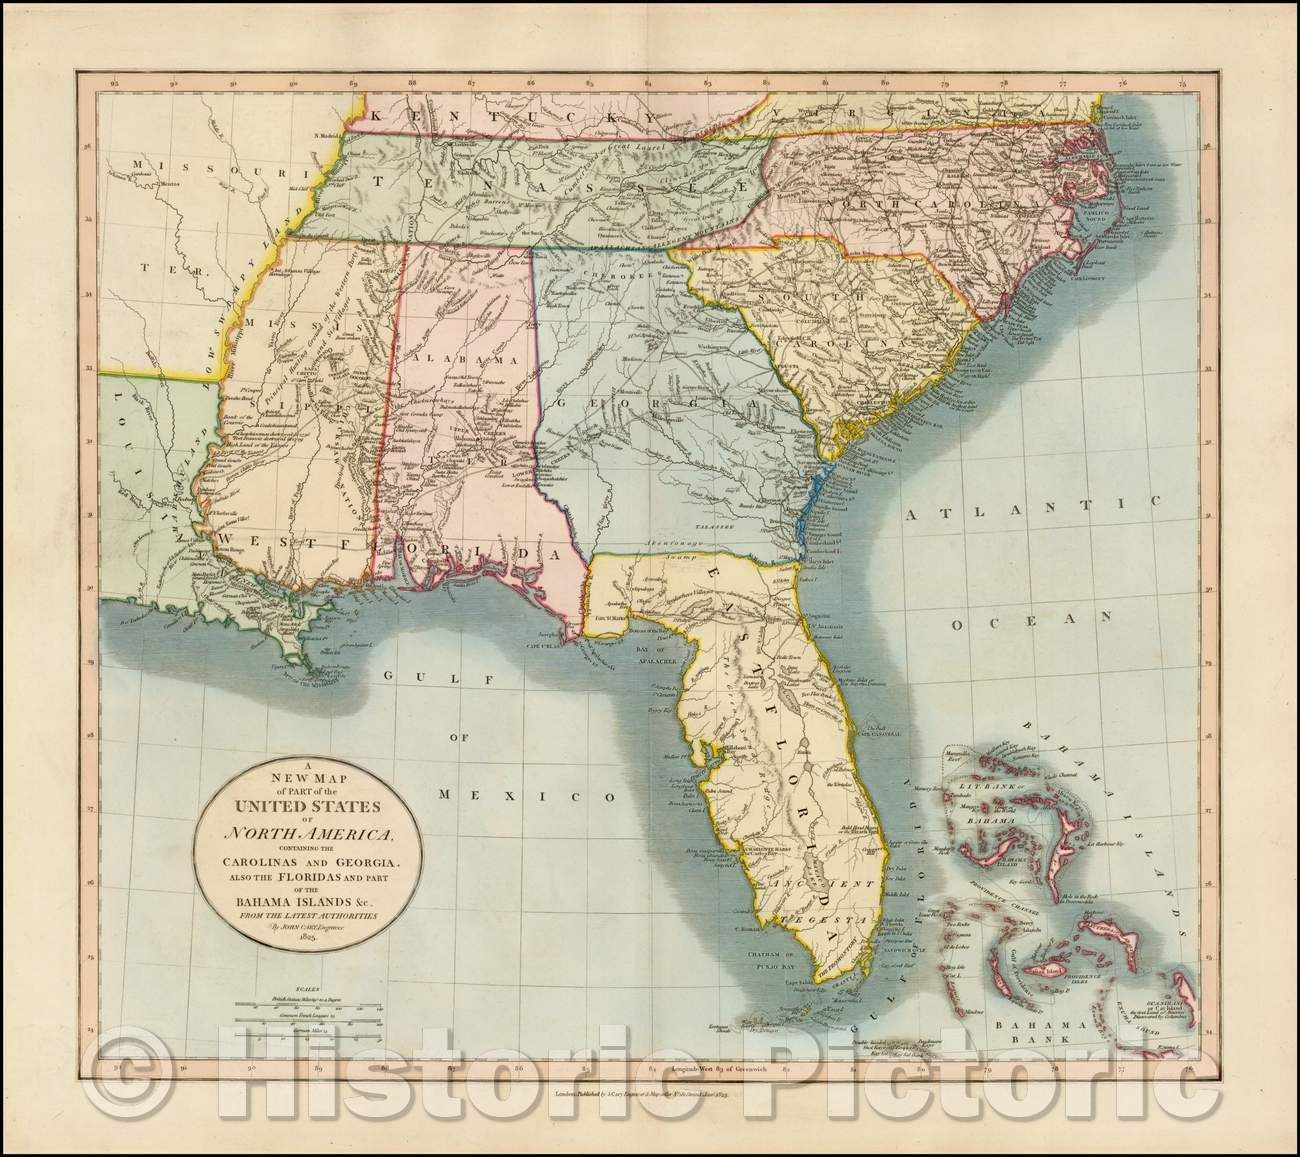 Historic Map - A New of Part of the United States of North America Containing The Carolinas And Georgia. Also The Floridas And Part Of The Bahama Islands, 1825 - Vintage Wall Art